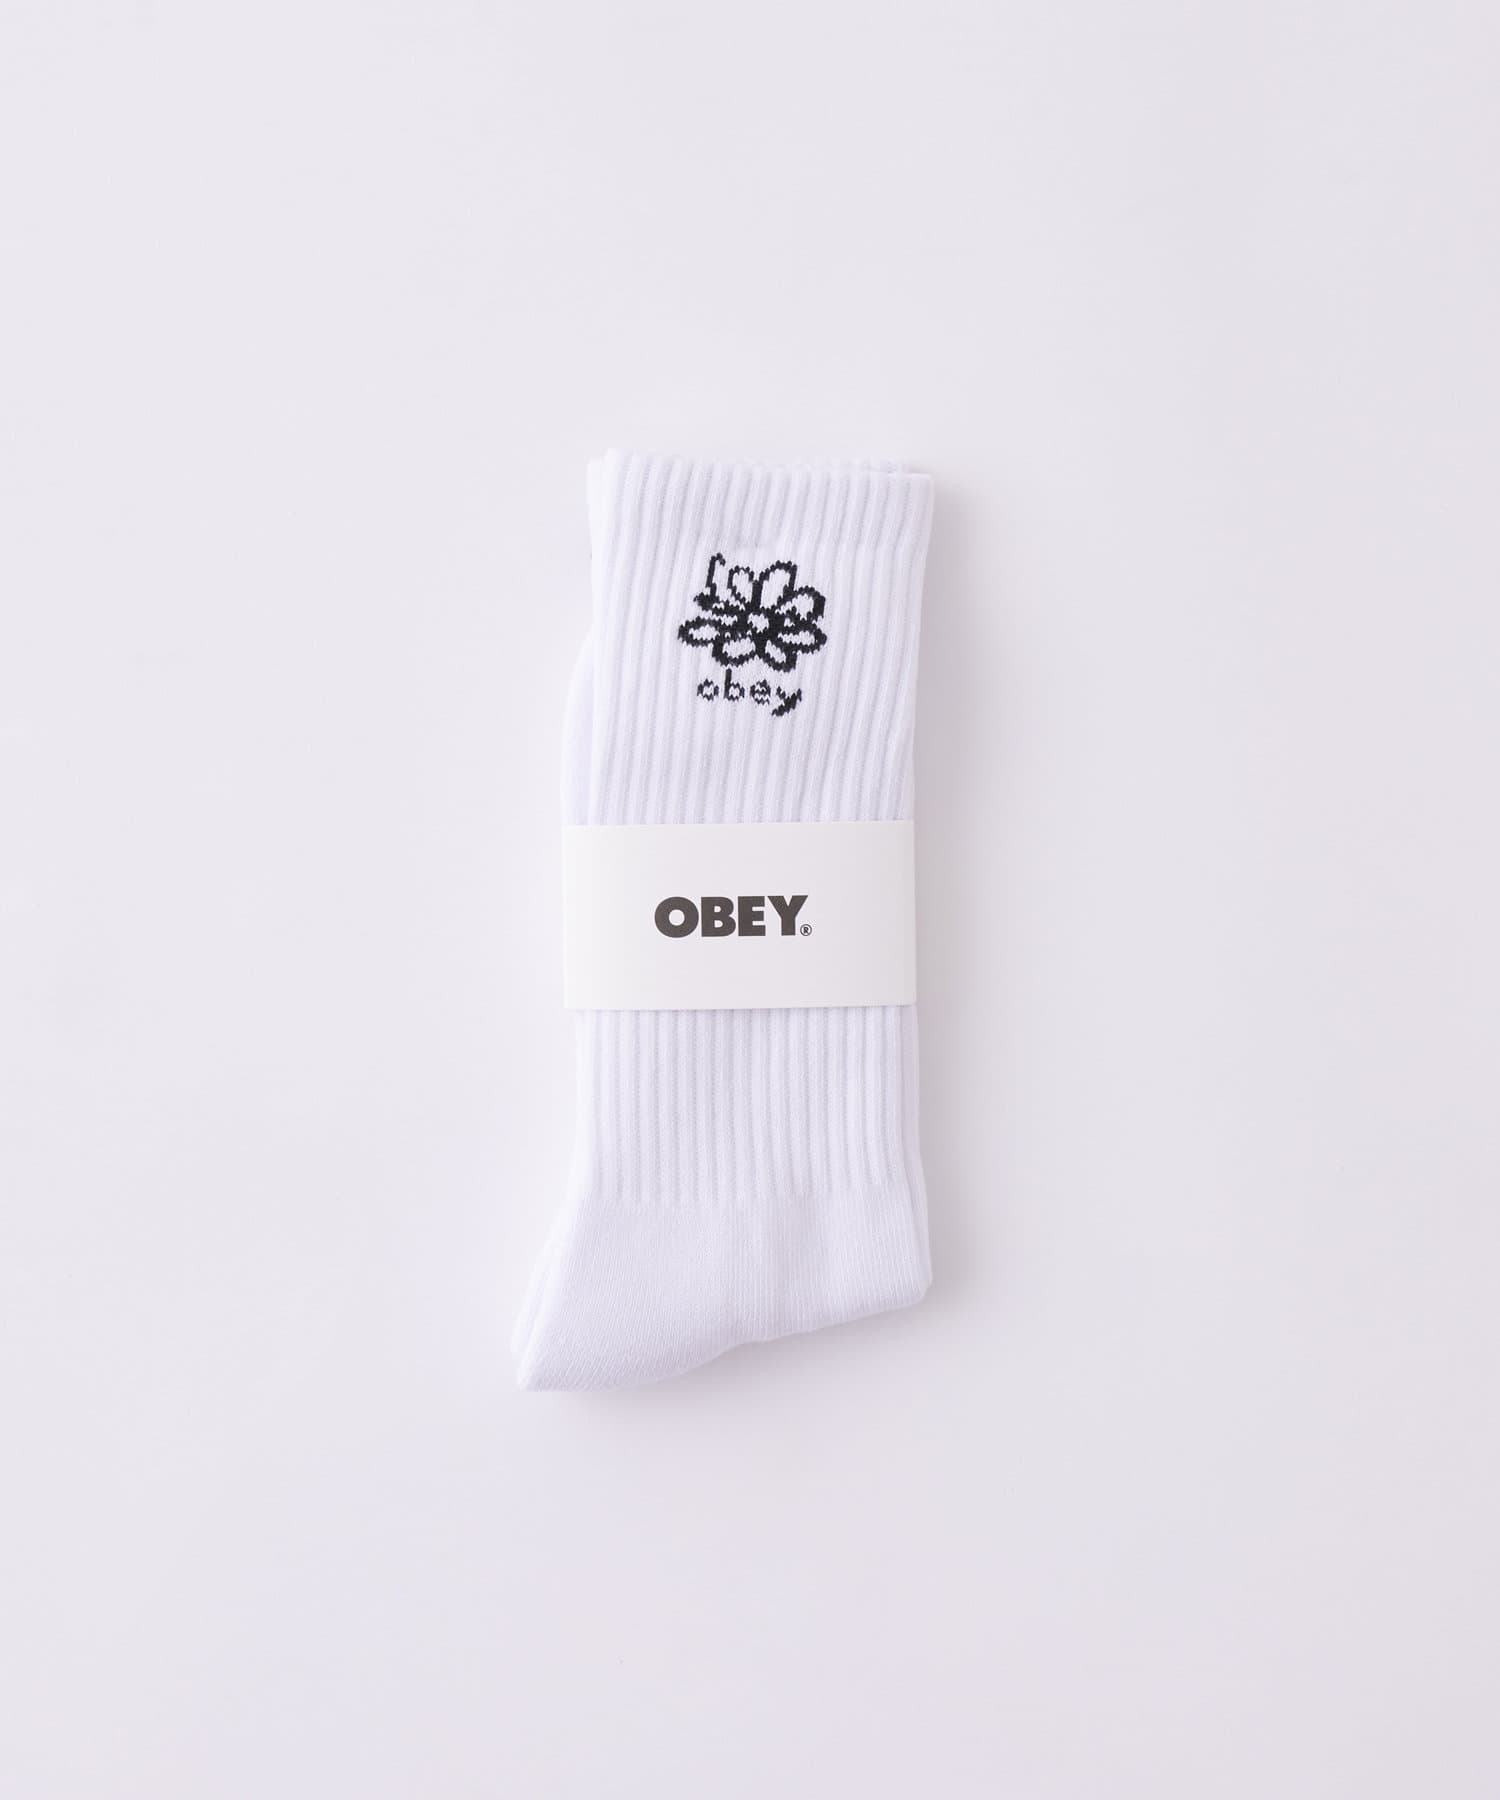 WHO’S WHO gallery(フーズフーギャラリー) OBEY DAHLIA SOCKS